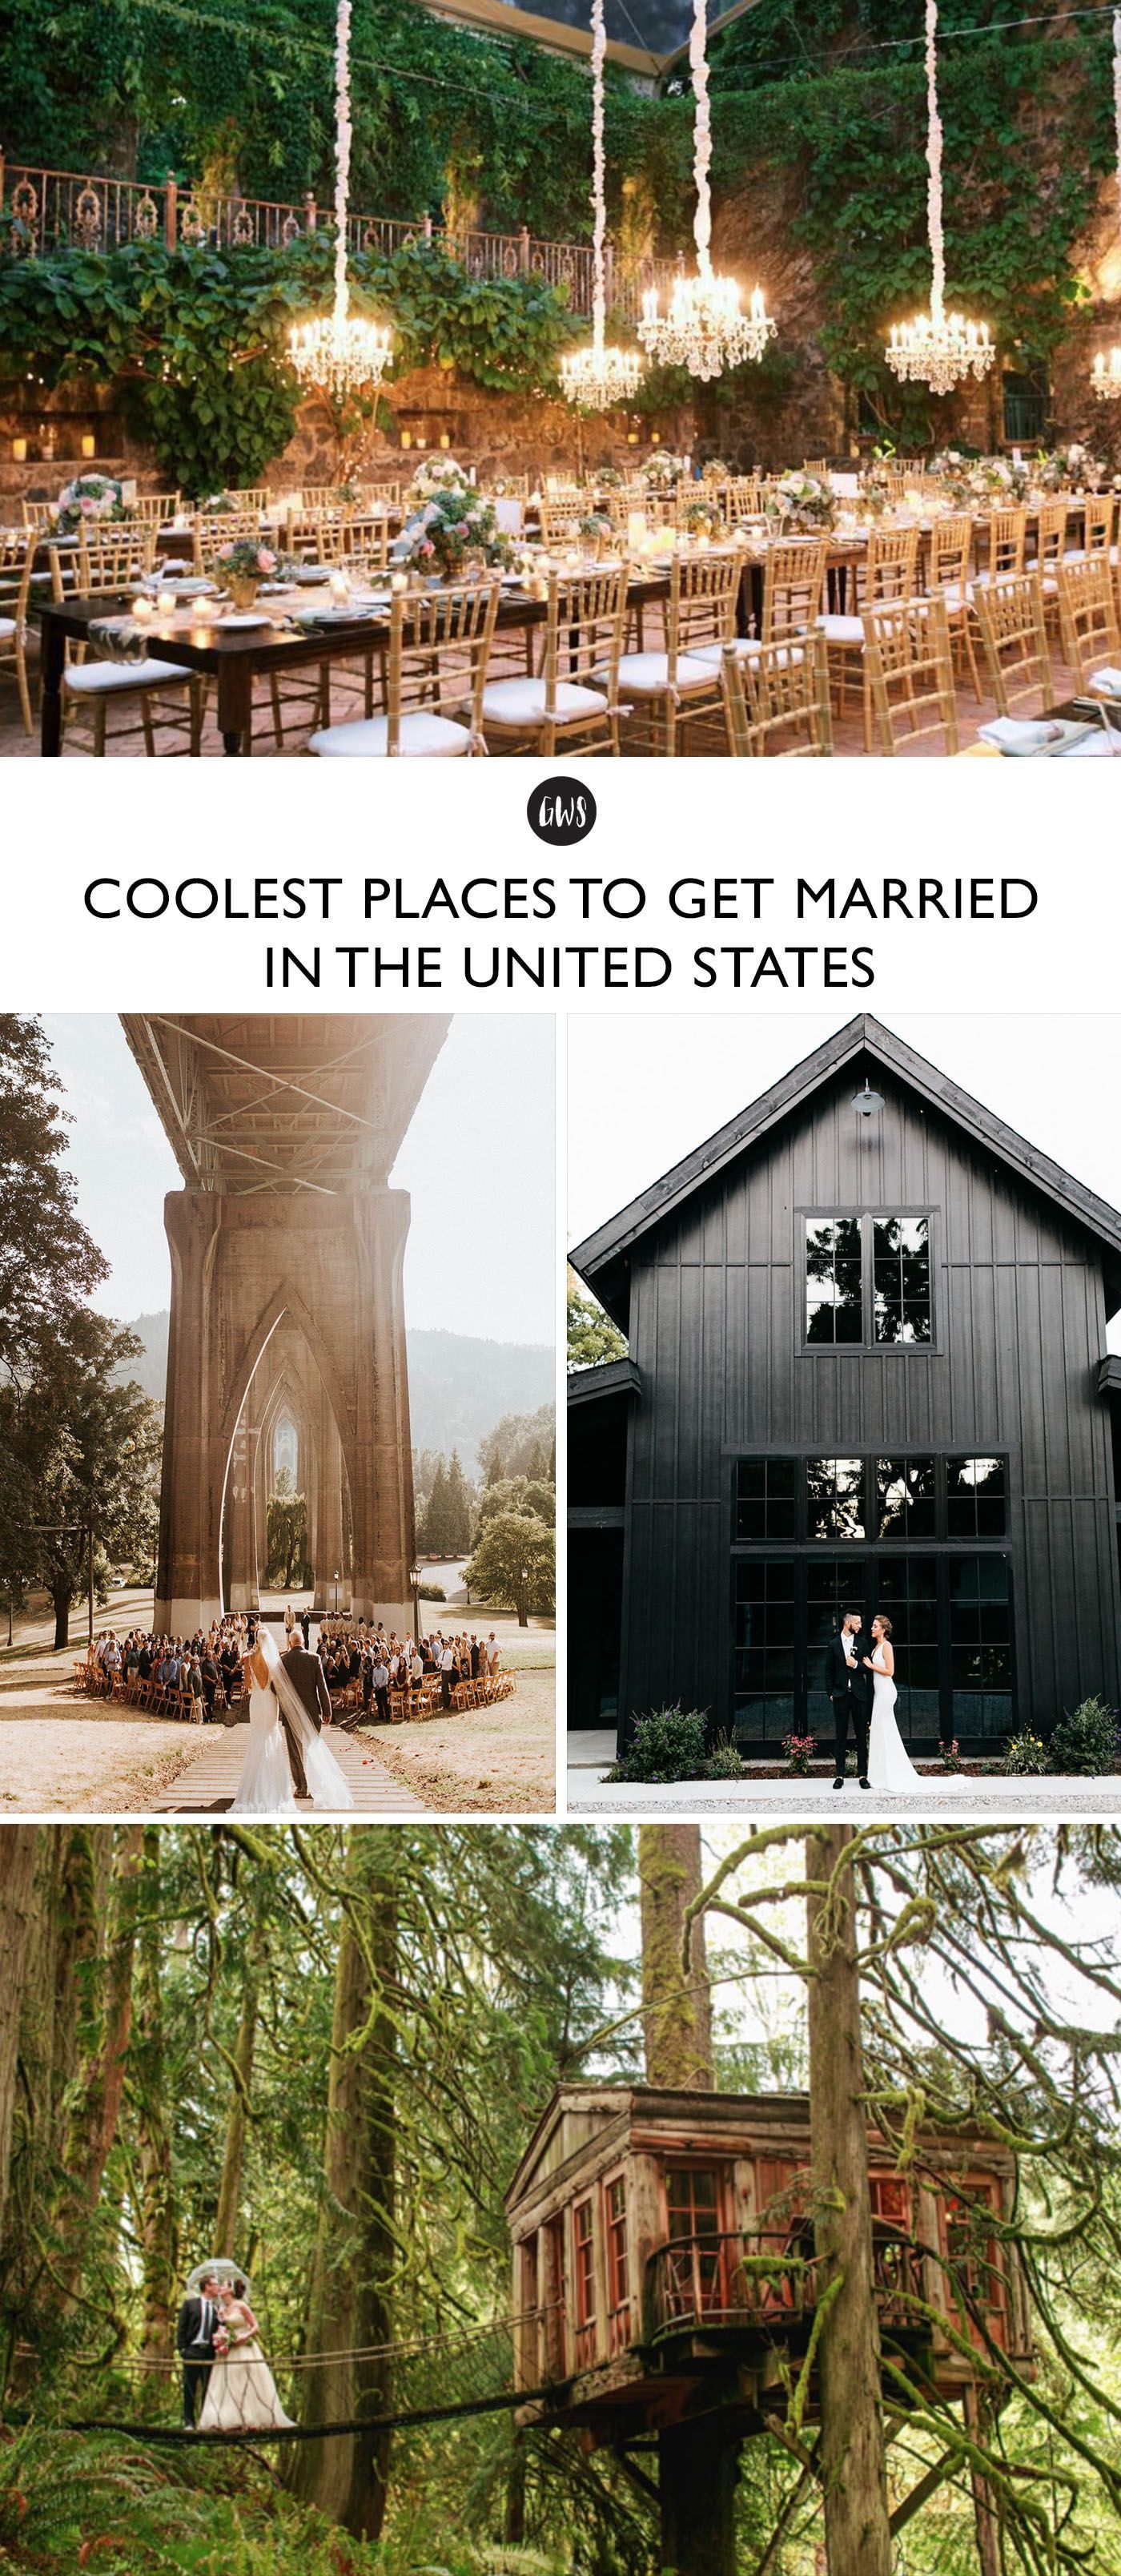 Top 26 Coolest Wedding Venues in the United States | Green Wedding Shoes -   12 wedding Destination united states ideas